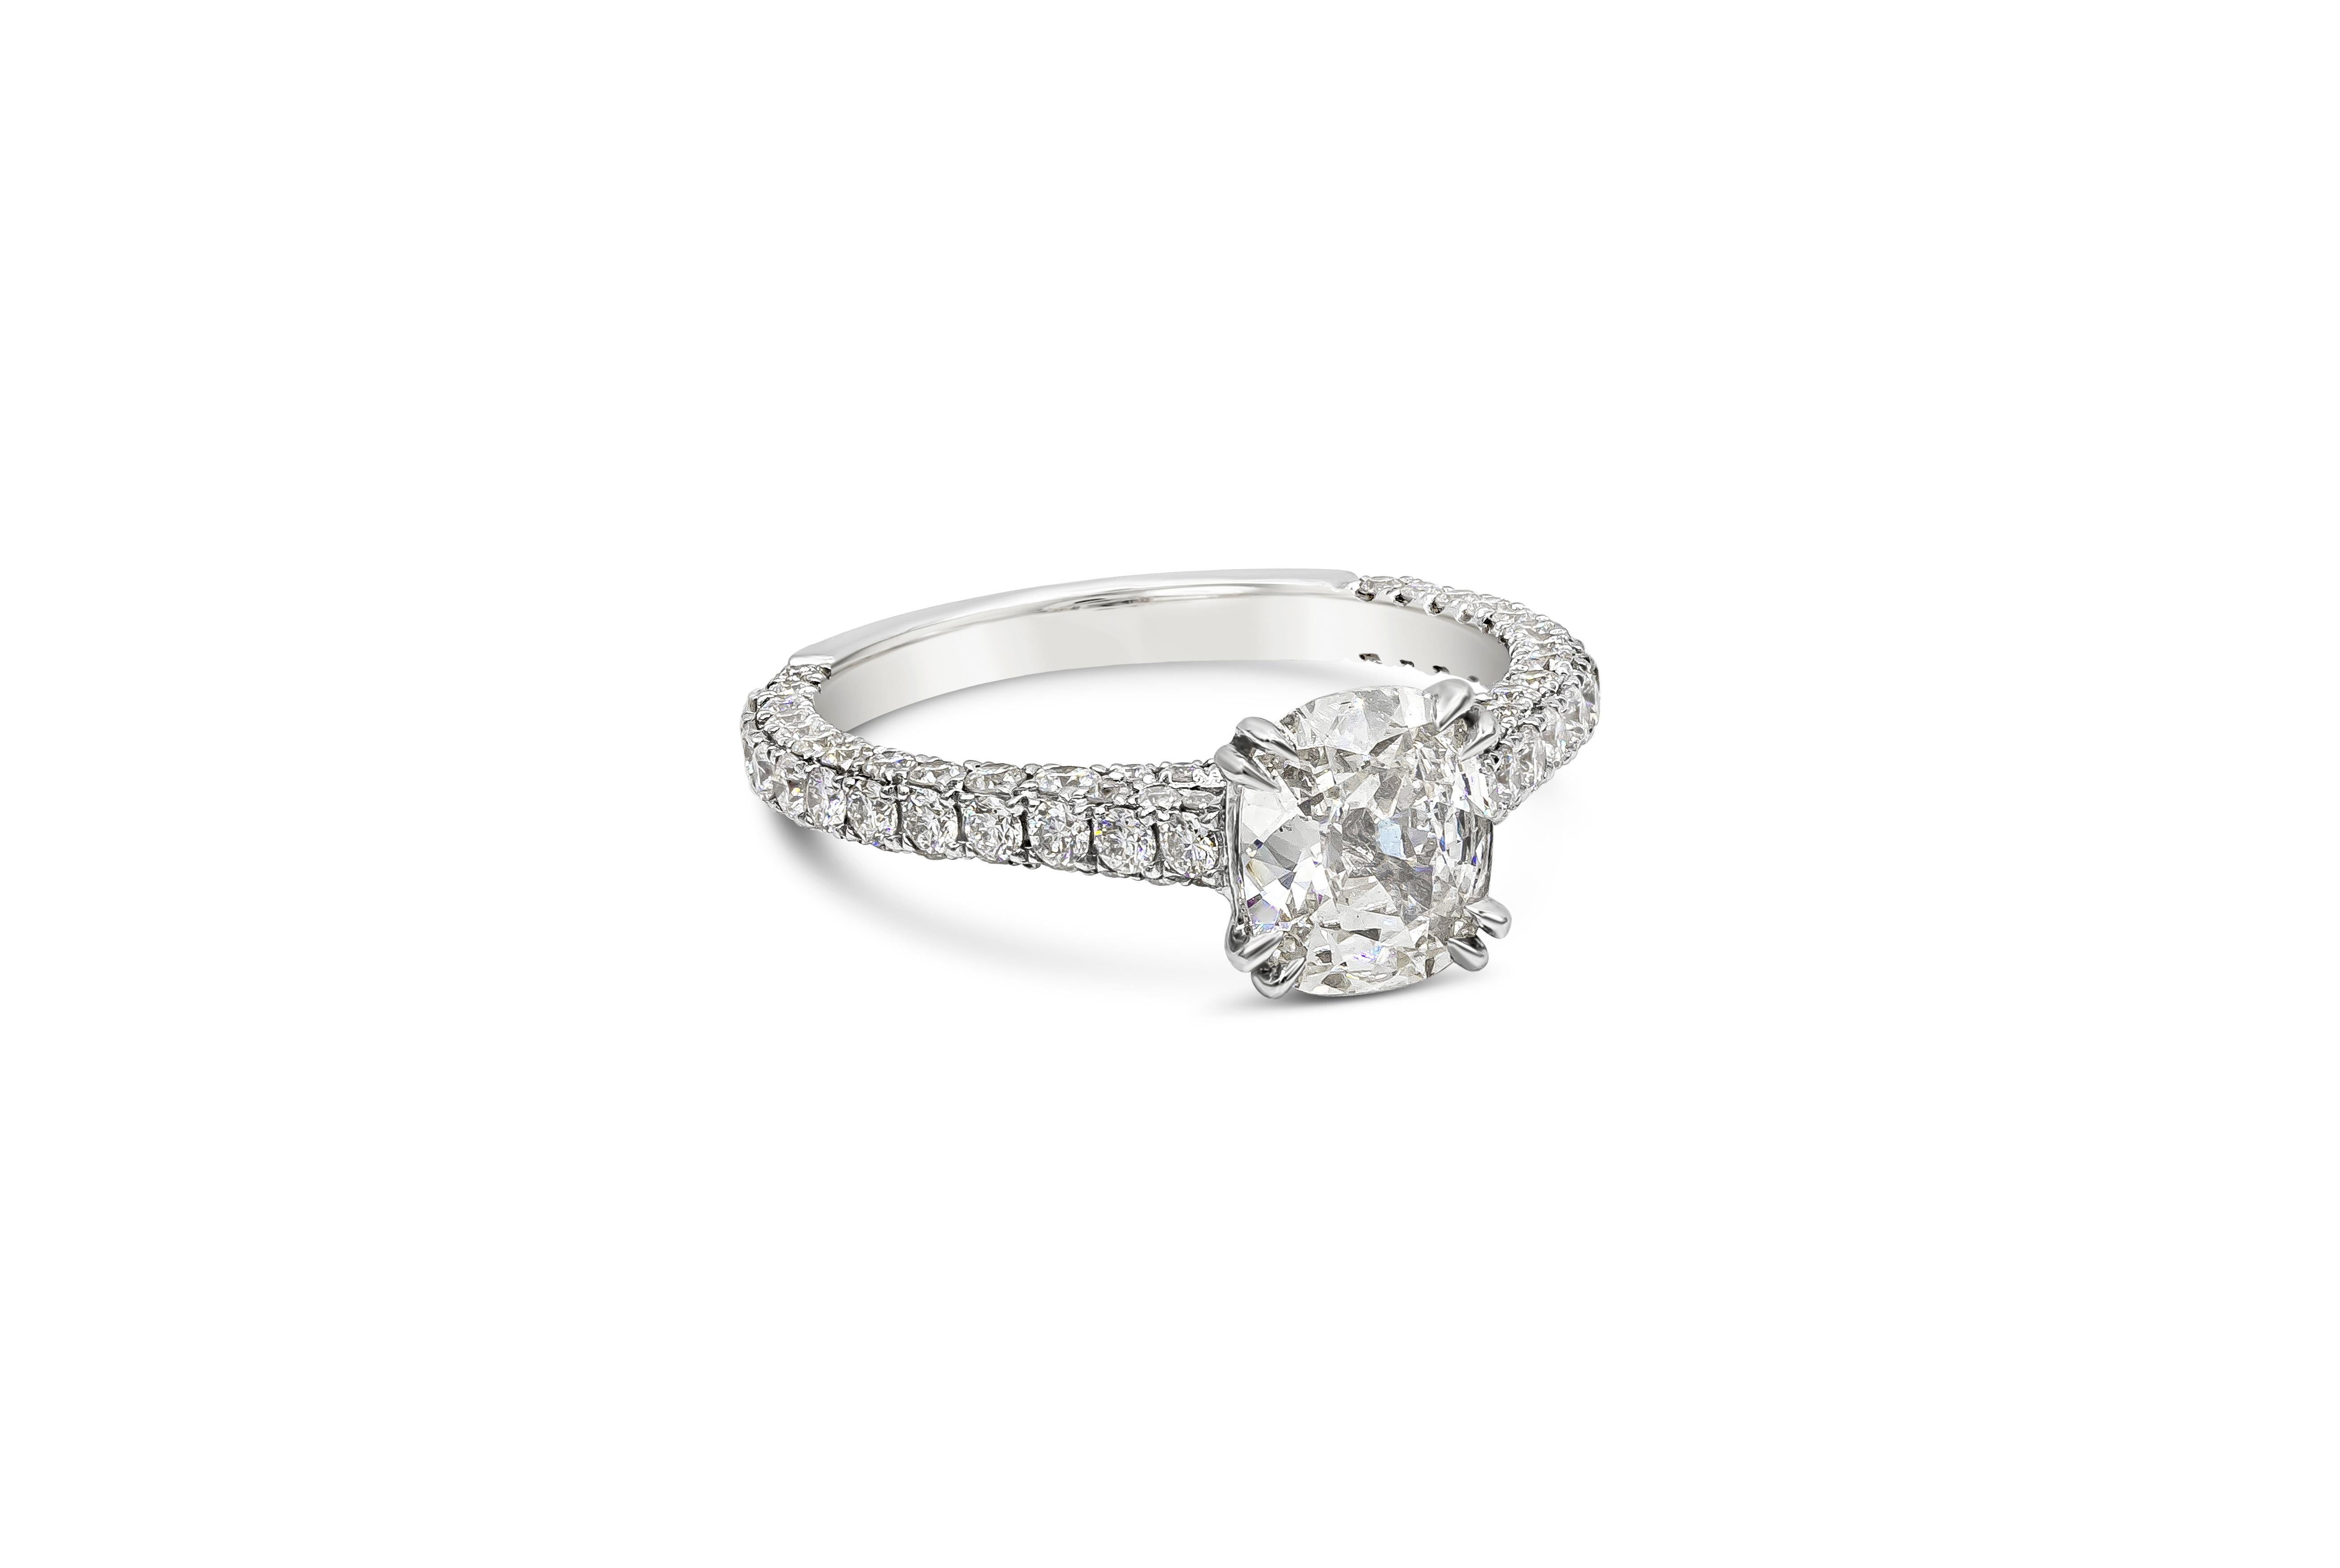 A classic engagement ring style showcasing a 1.03 carats cushion cut diamond, certified by EGL as G color, VS1 in clarity and set in a timeless eight prong basket setting. Accented with brilliant round diamonds on the shank of the ring weighing 1.05